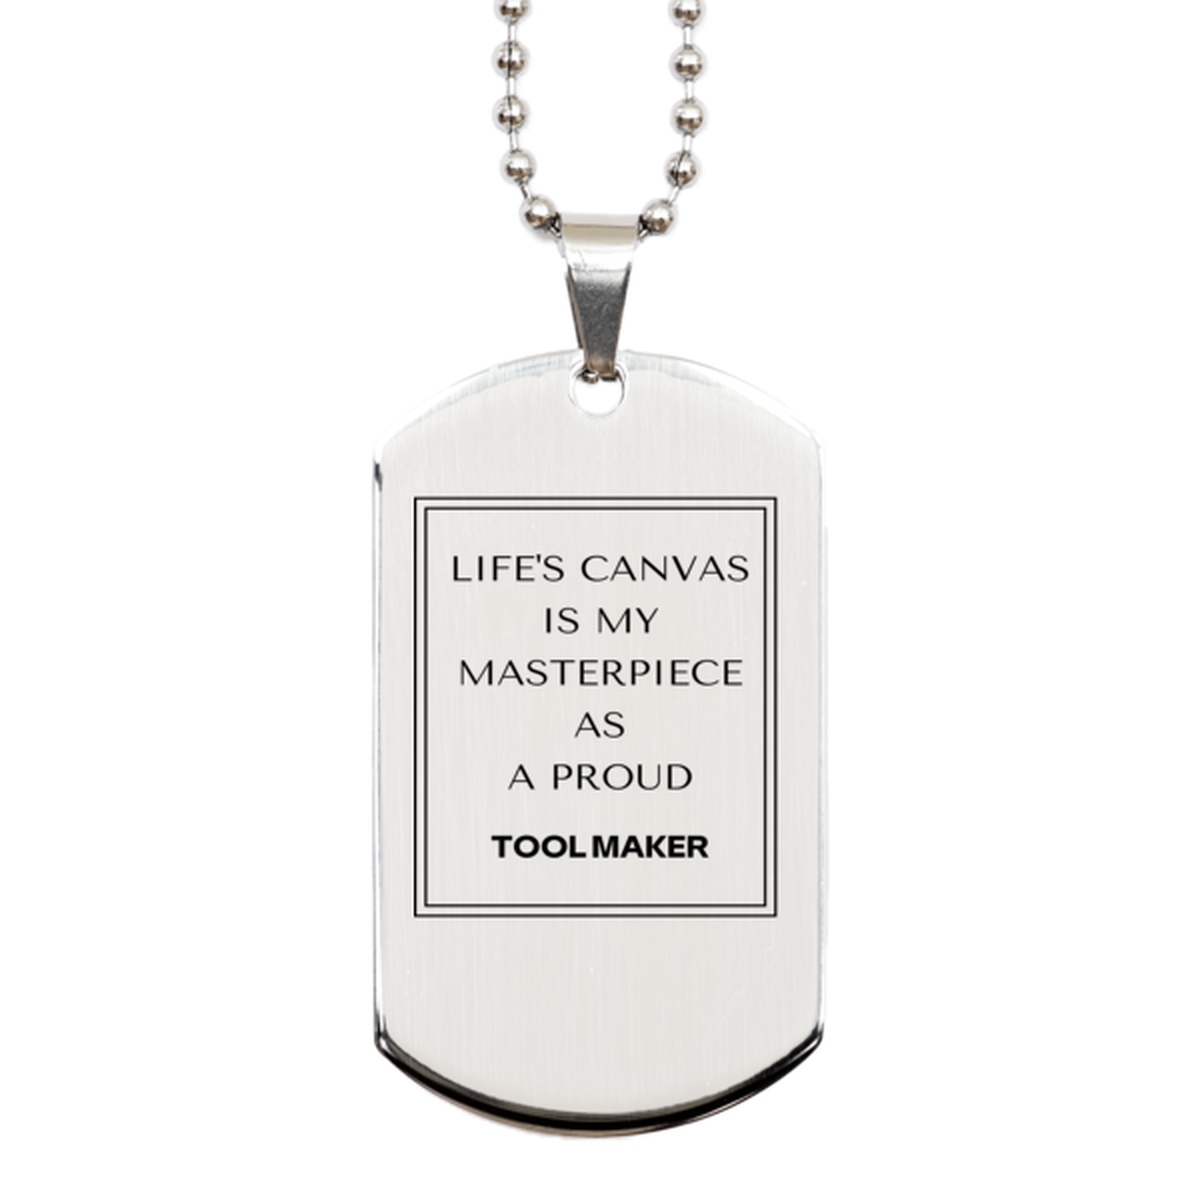 Proud Tool Maker Gifts, Life's canvas is my masterpiece, Epic Birthday Christmas Unique Silver Dog Tag For Tool Maker, Coworkers, Men, Women, Friends